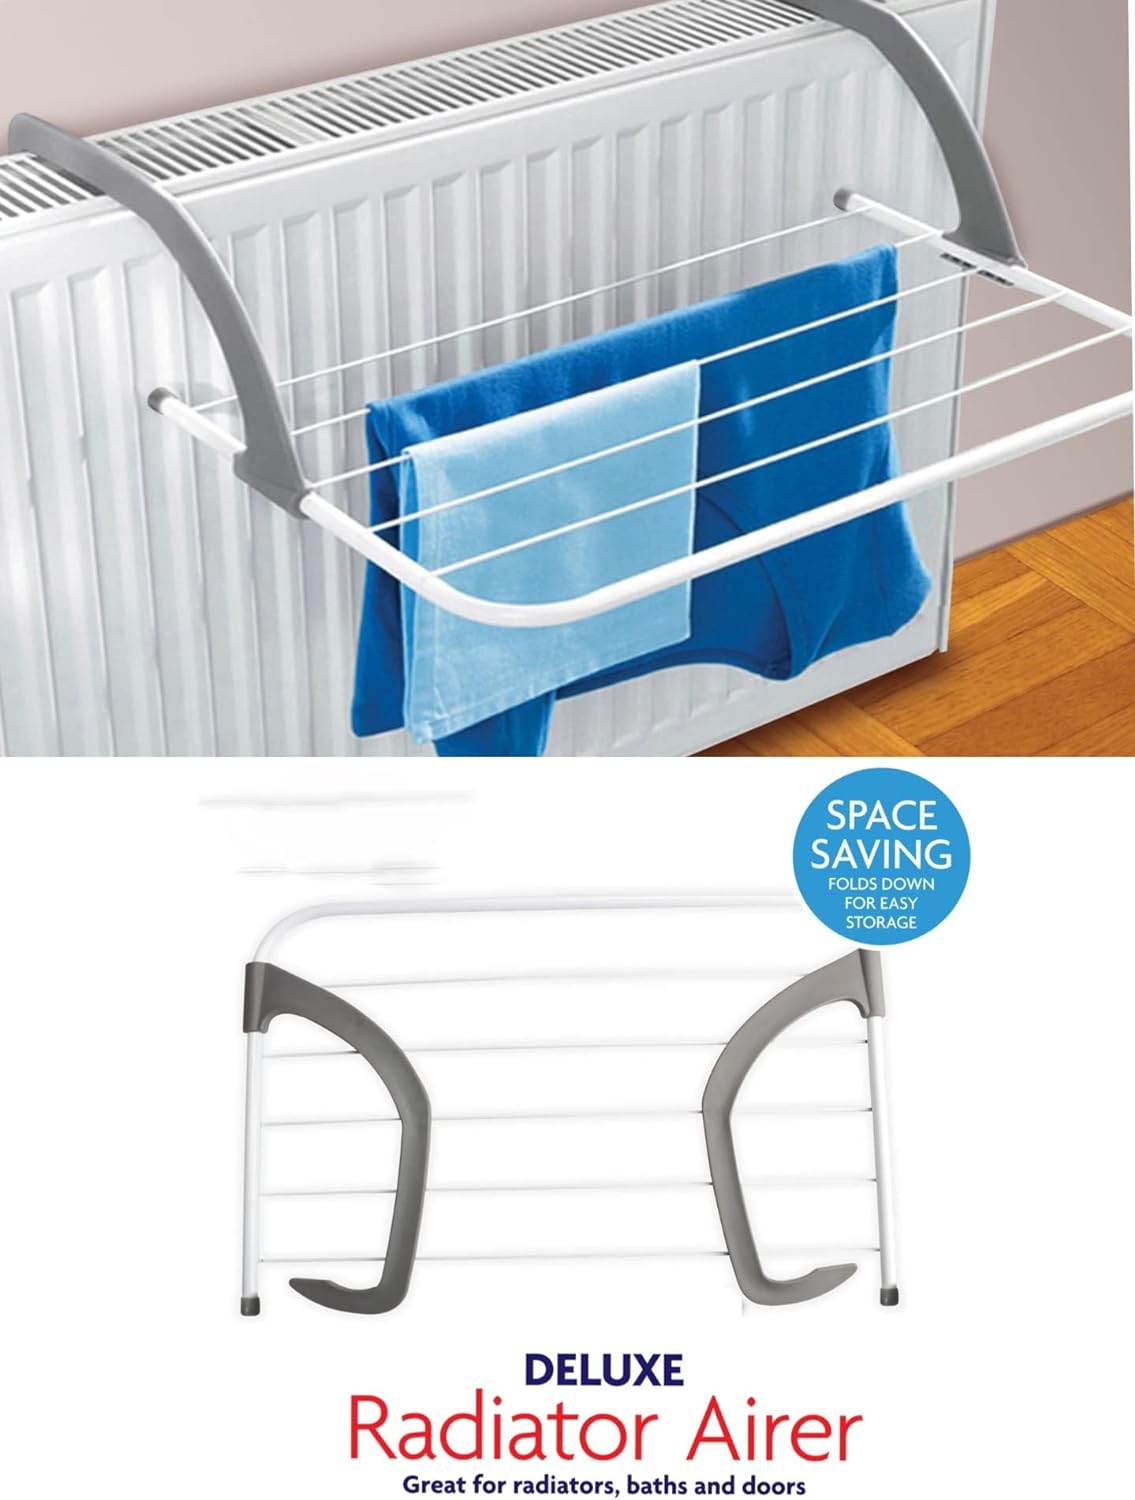 ADEPTNA Folding Radiator Cloth Airer Rack - Clothes Laundry Dryer Portable – Great for Radiators Baths and Doors (1 PACK)